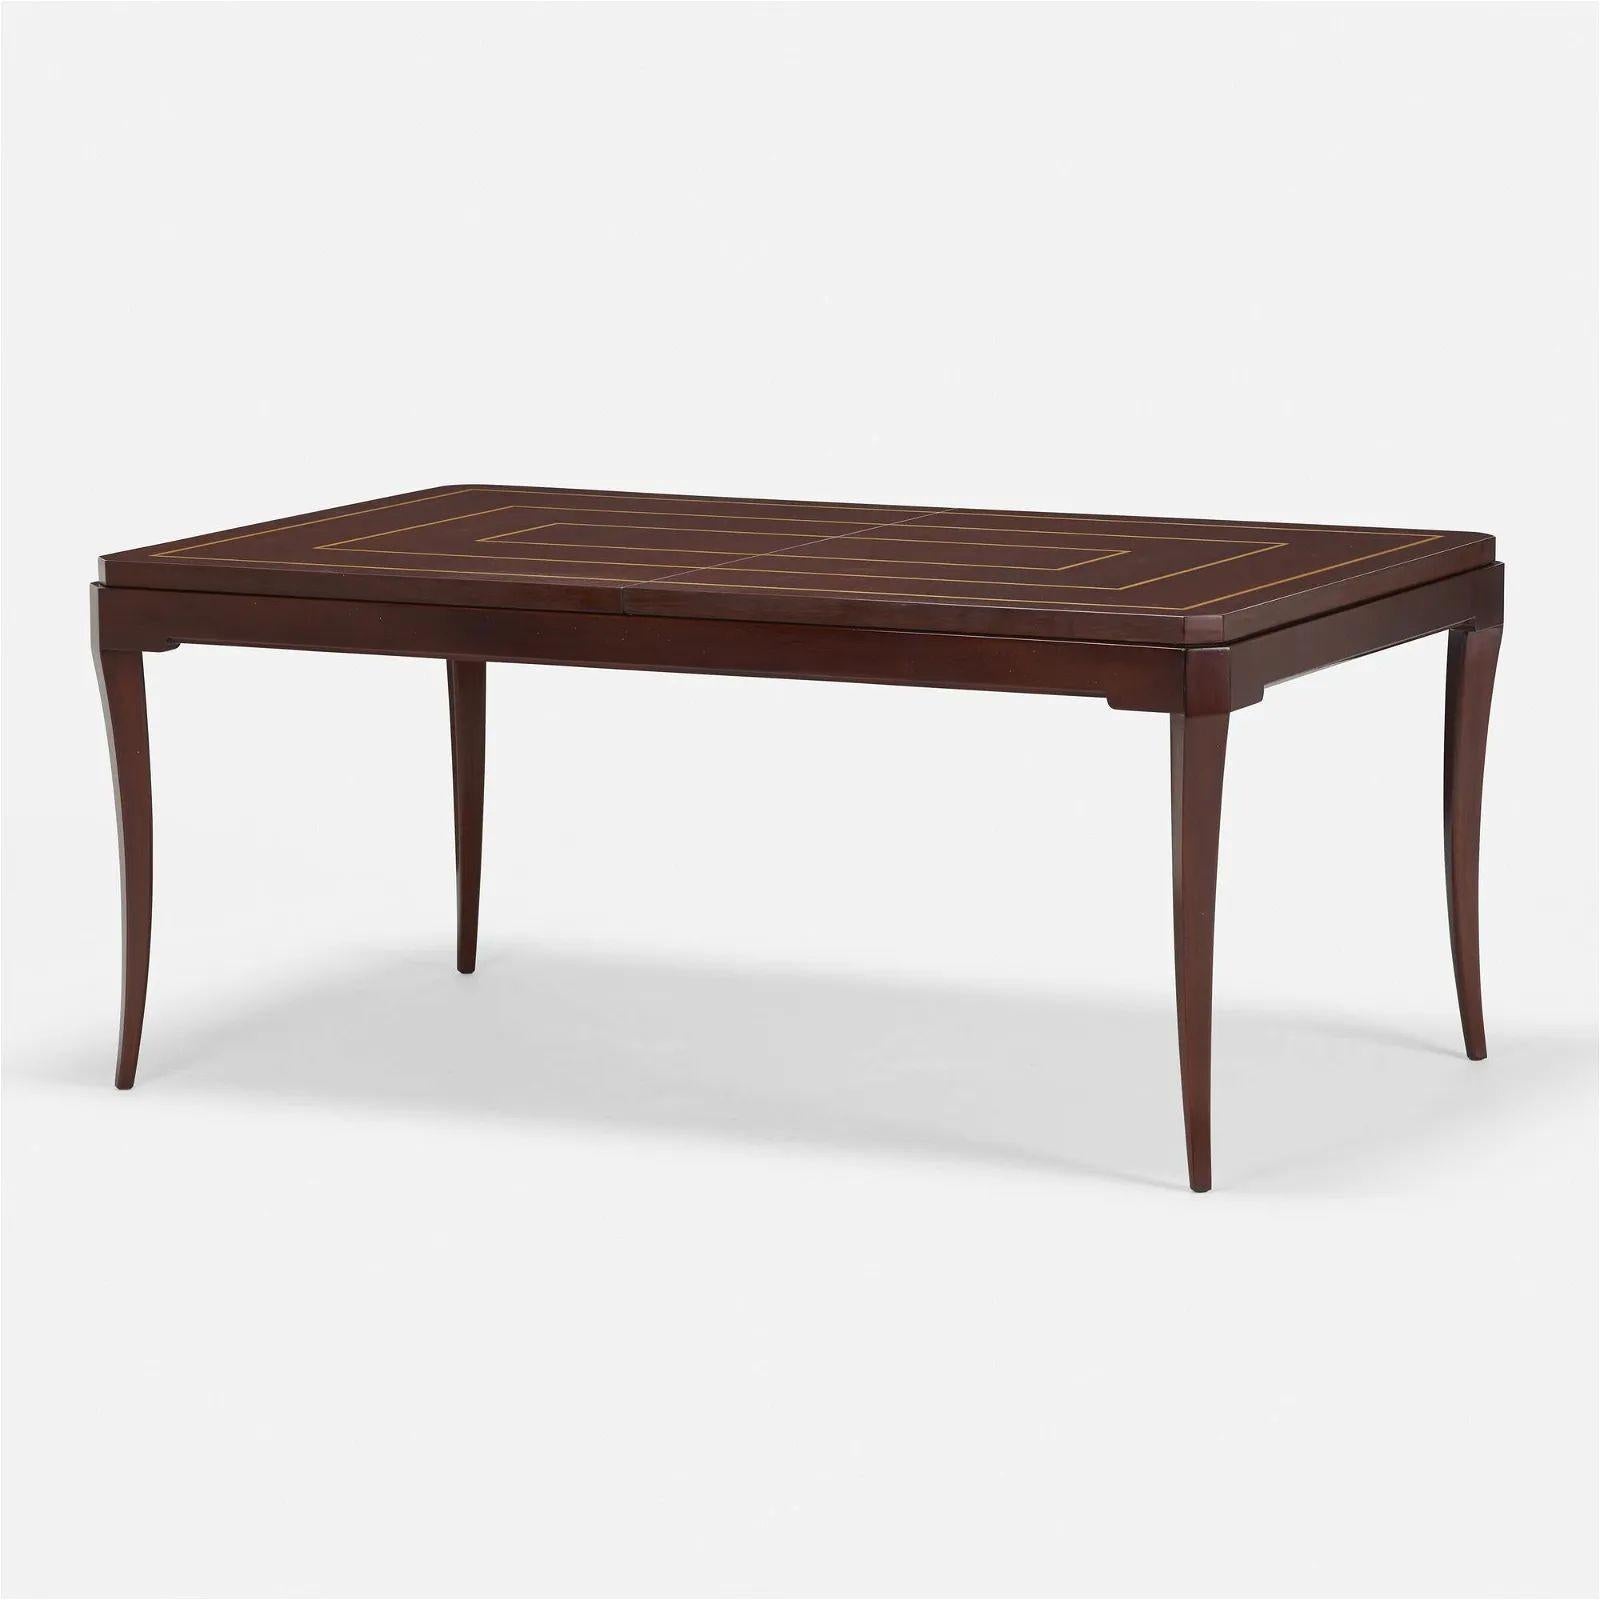 American Mid-Century Modern Tommi Parzinger Dining Table, 2 Leaves, Mahogany, Inlaid For Sale